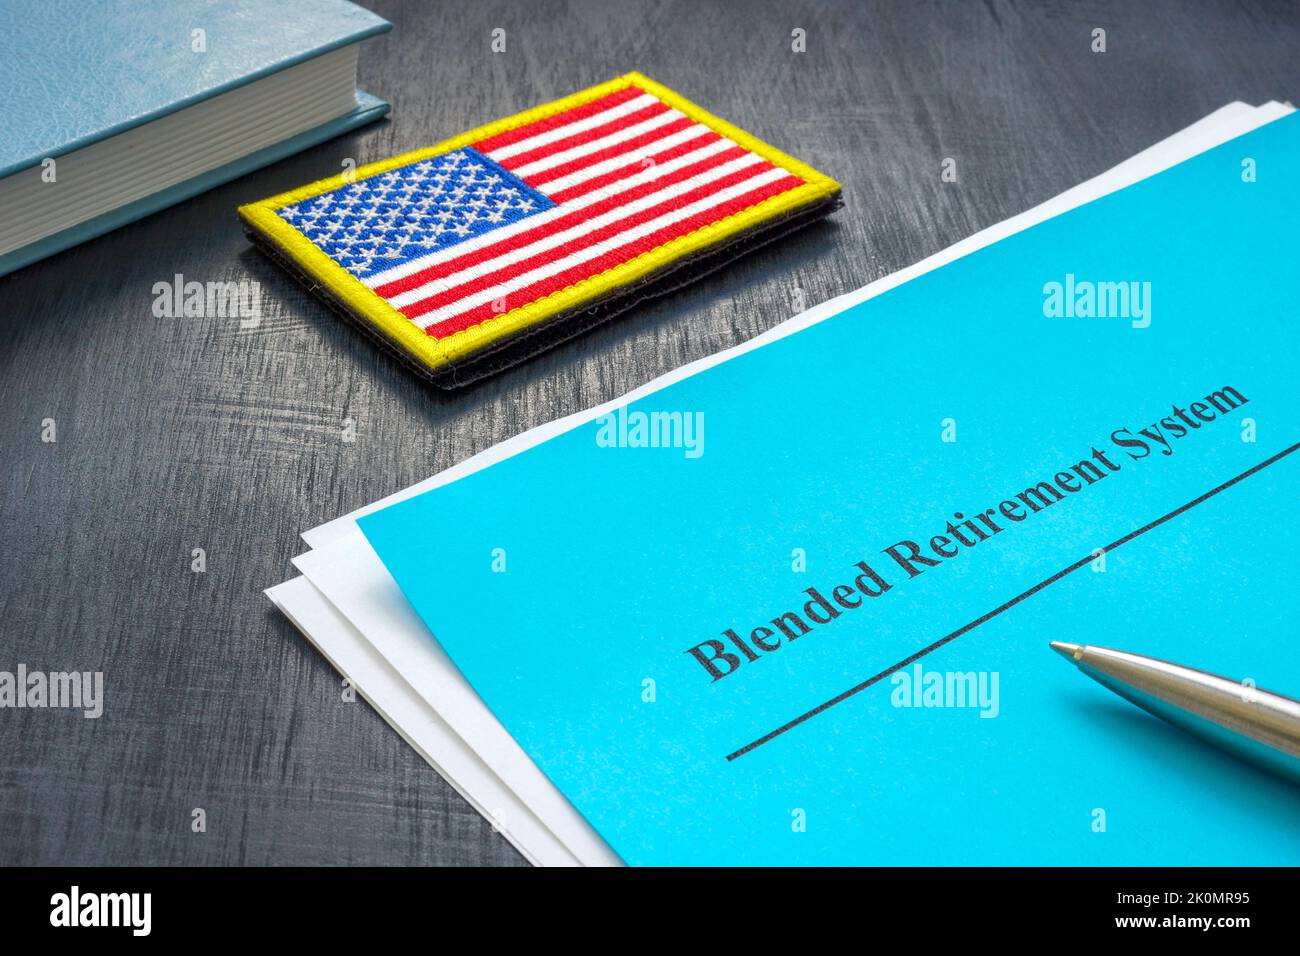 Documents about blended retirement system or BRS. Stock Photo